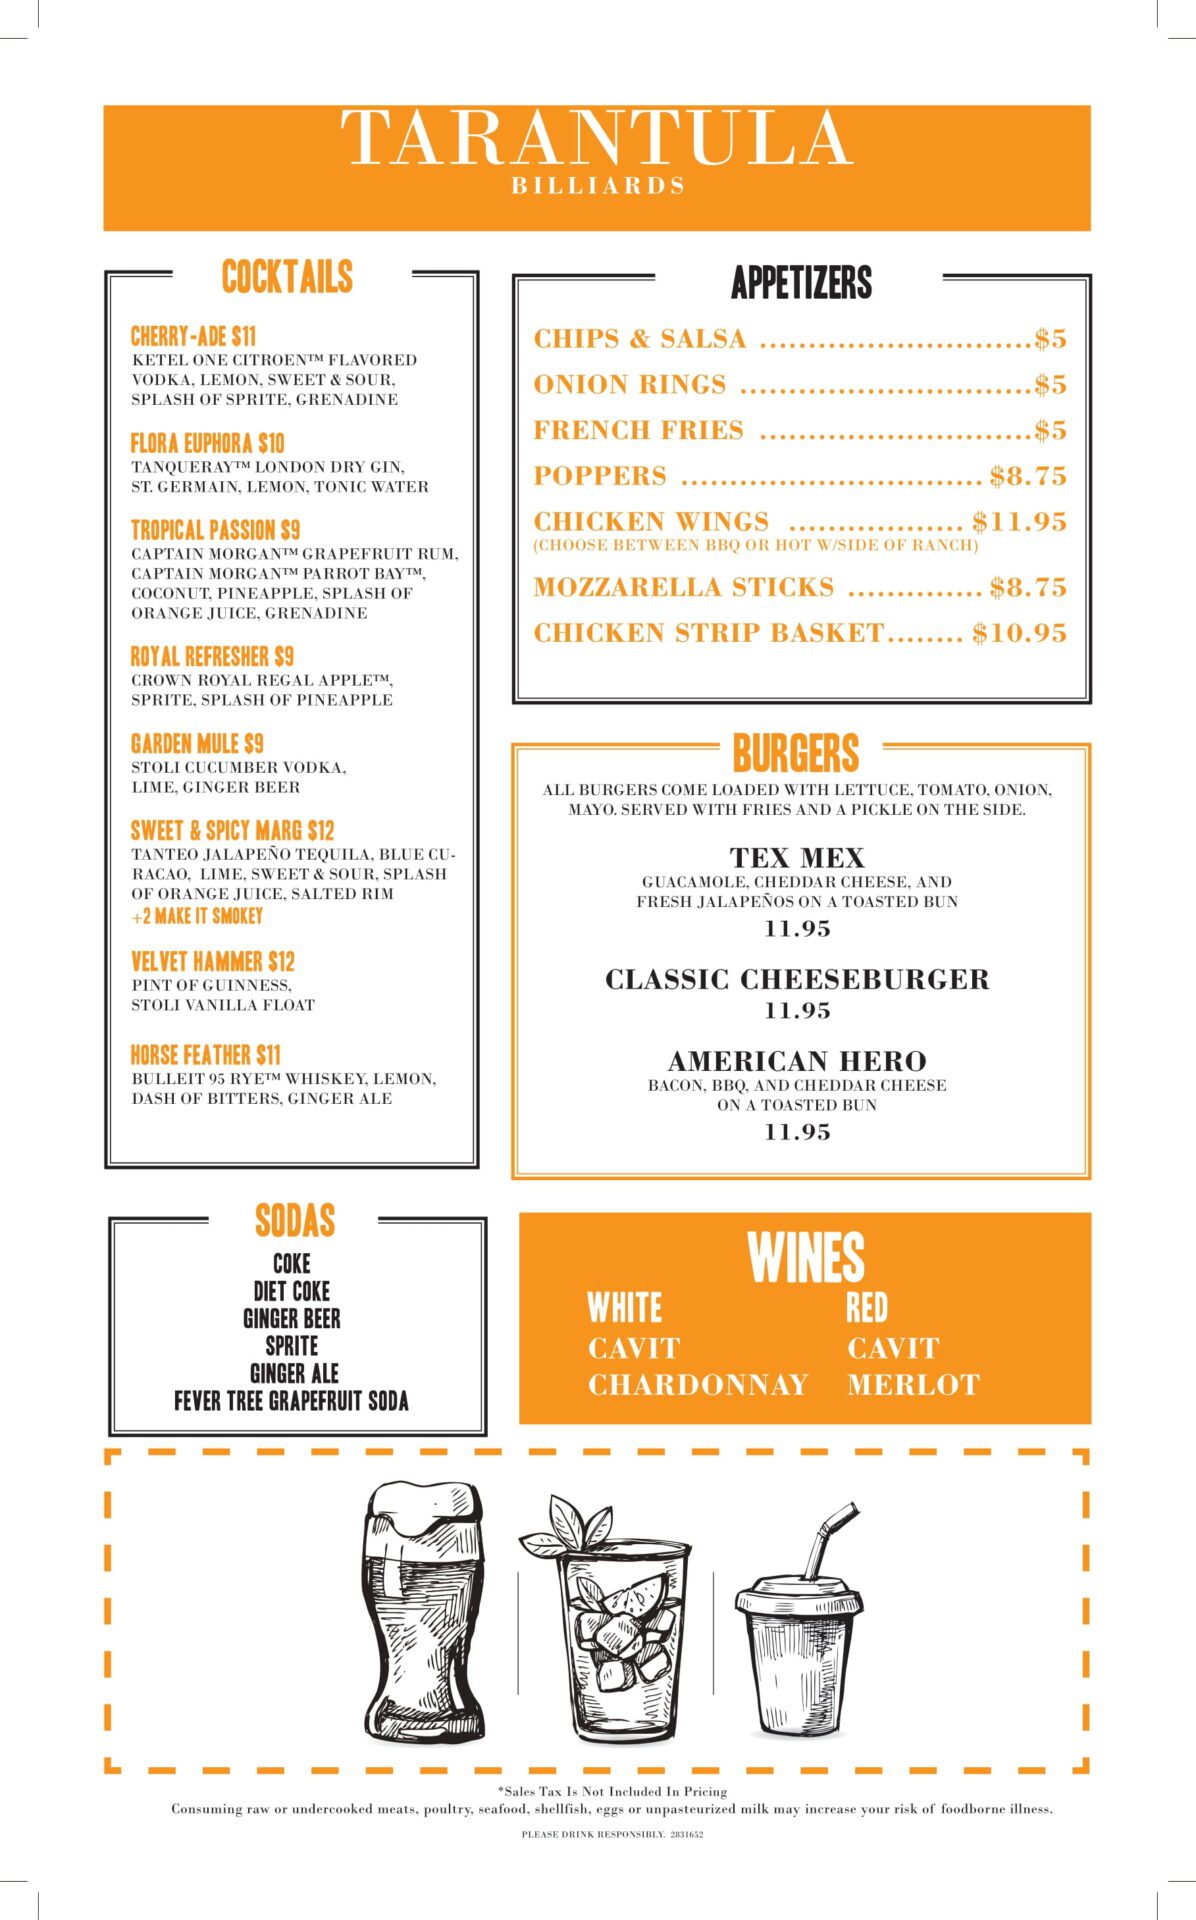 A menu of the restaurant in orange and white